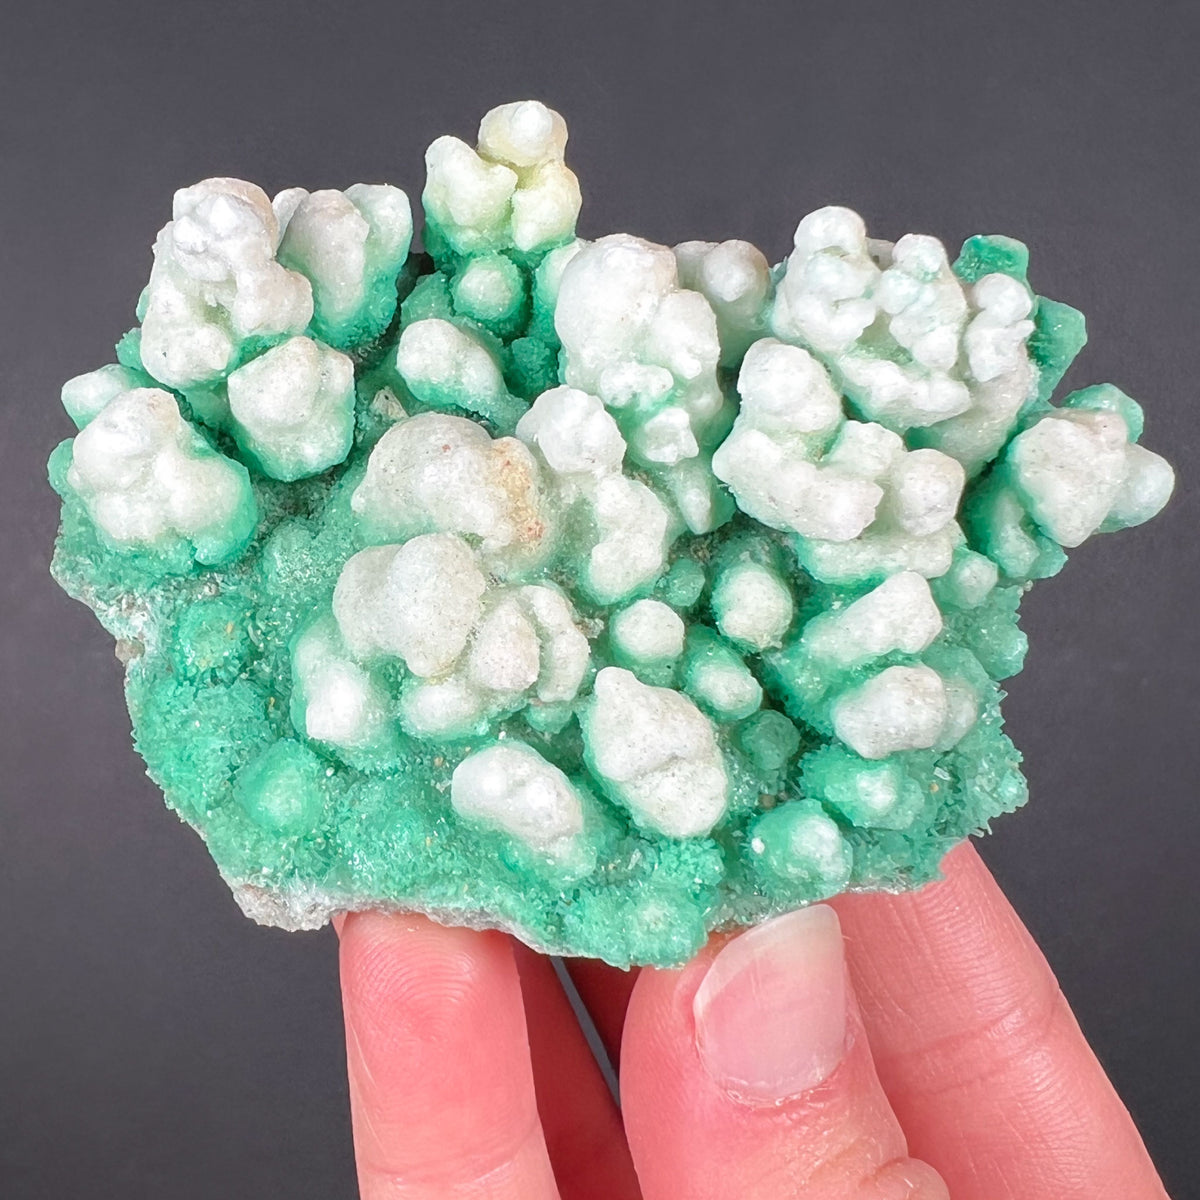 Green and White Selenite Crystals from Australia